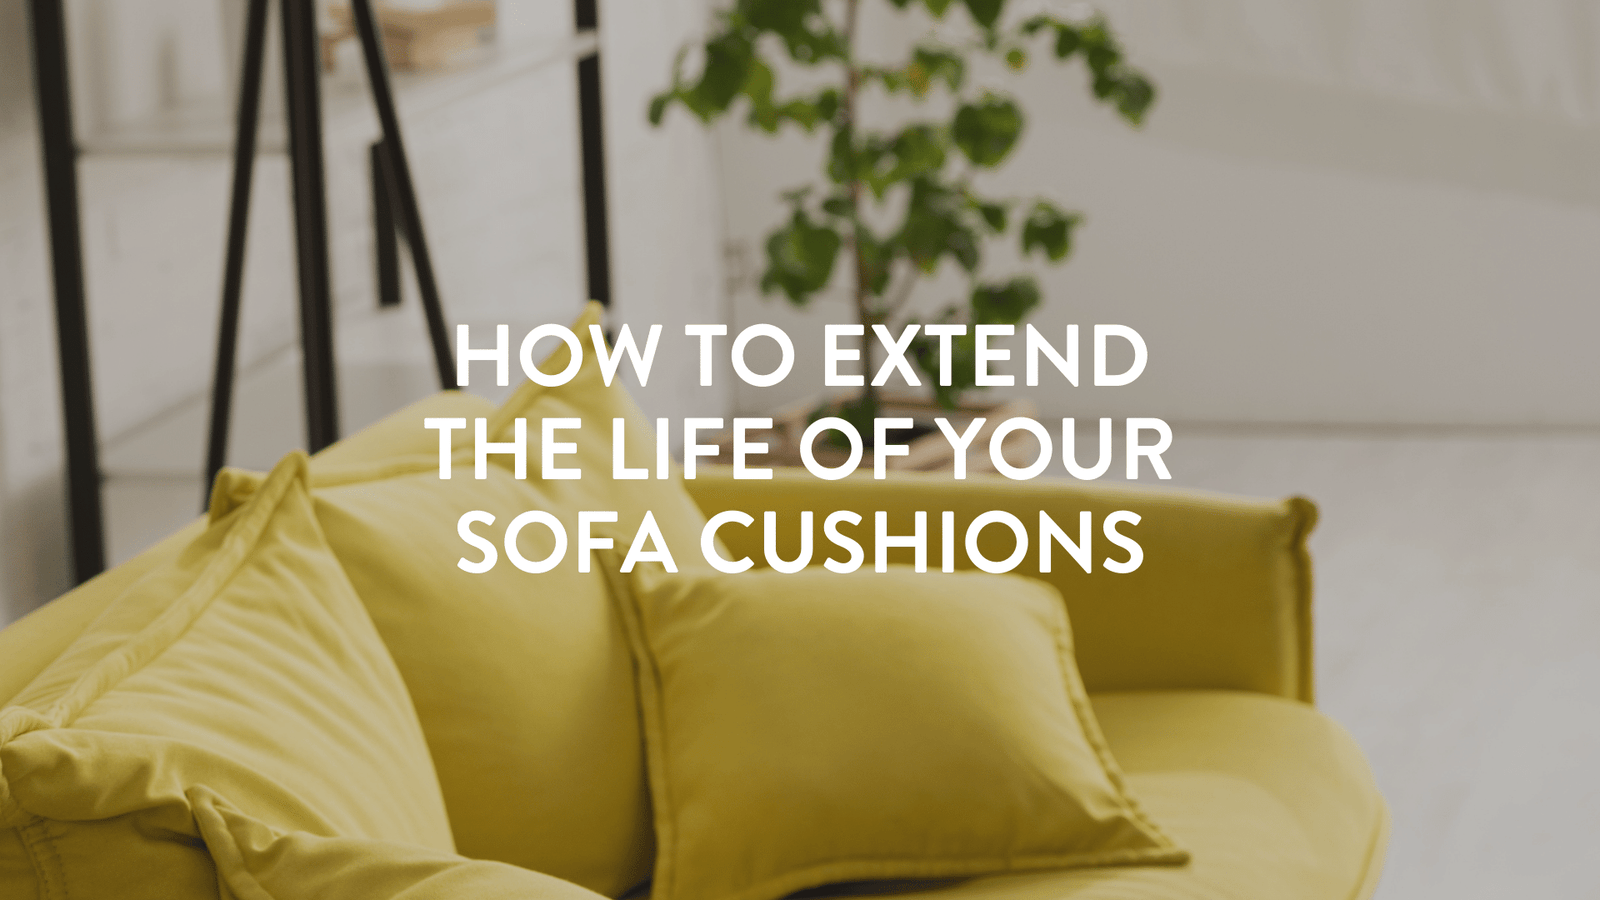 How to extend the life of your sofa cushions.